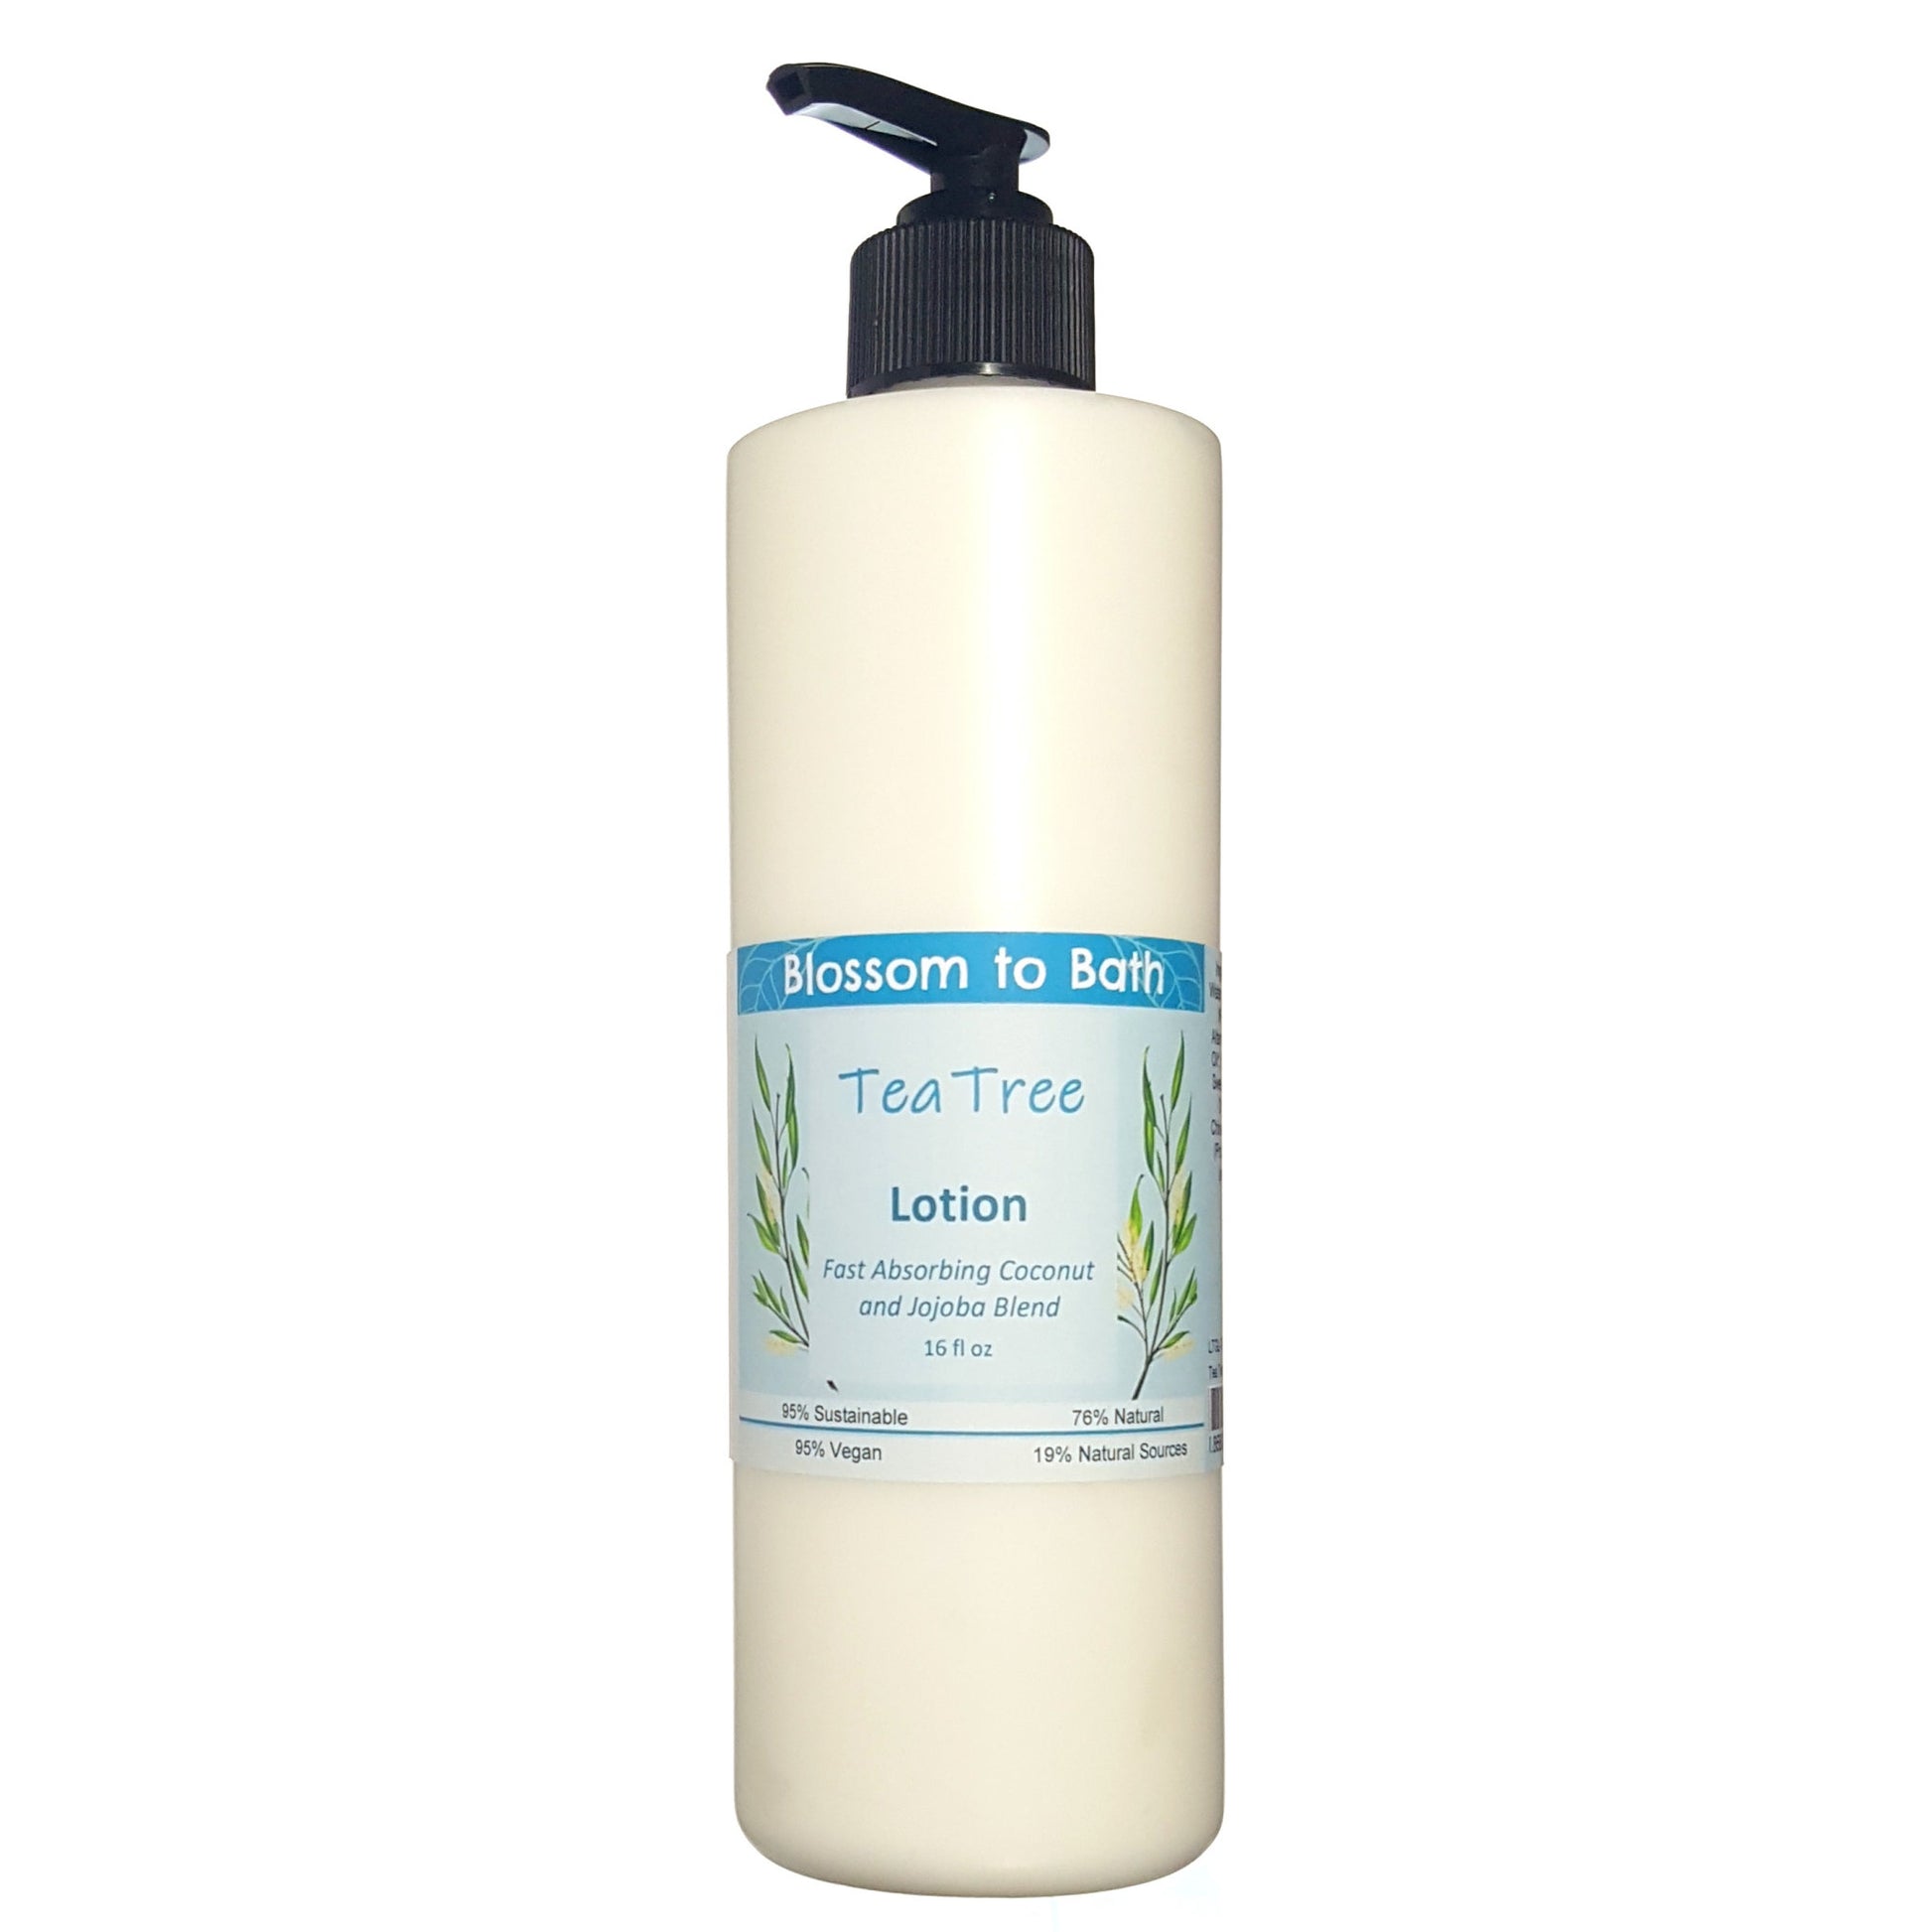 Buy Blossom to Bath Tea Tree Lotion from Flowersong Soap Studio.  Daily moisture luxury that soaks in quickly made with organic oils and butters that soften and smooth the skin  Tea tree's fresh fragrance embodies a deep down clean.